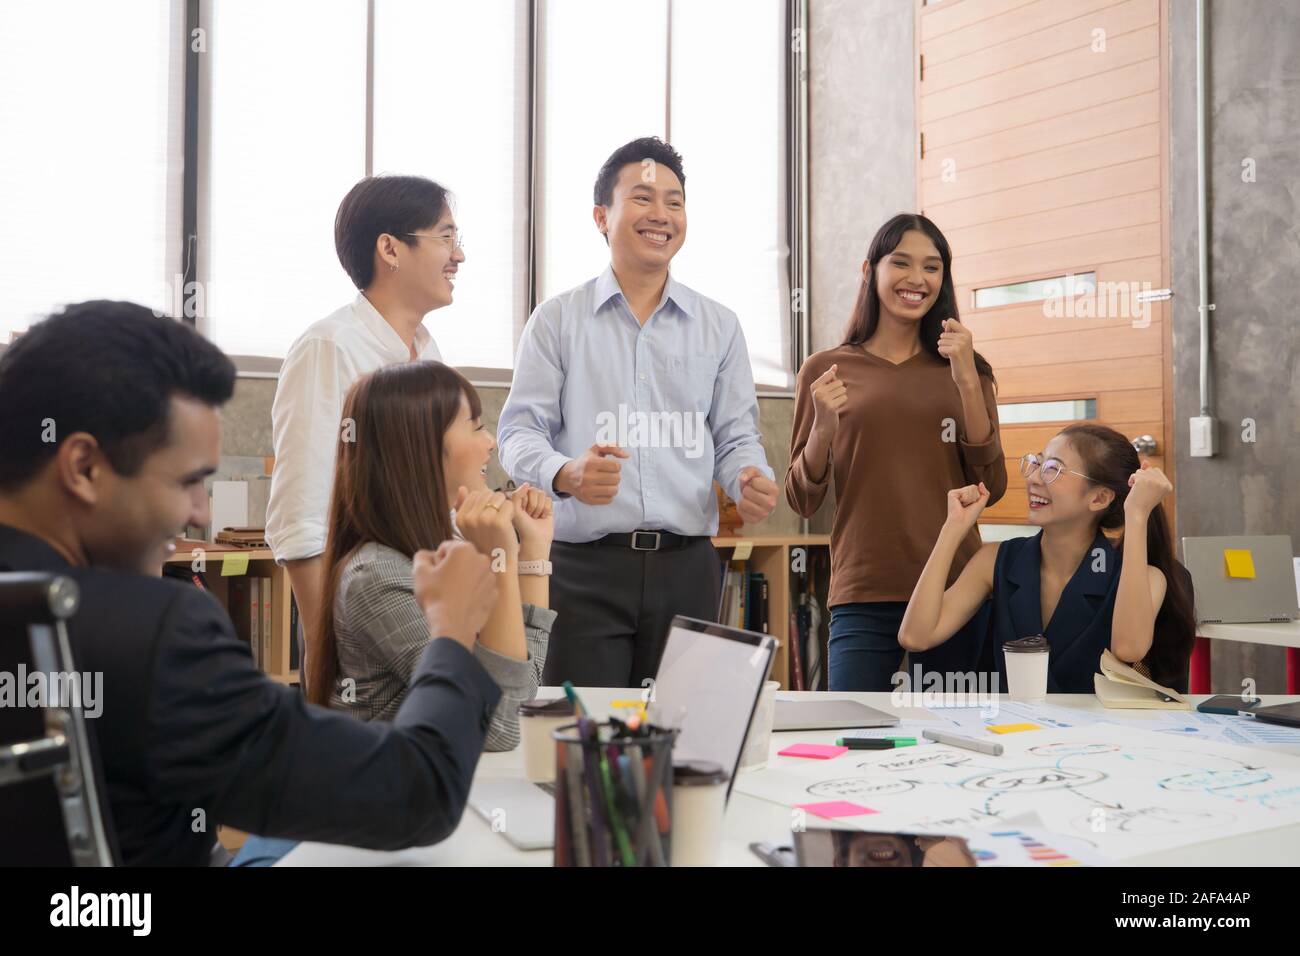 Group of Asian team creative business people Happy to be successful partnership teamwork concept Stock Photo